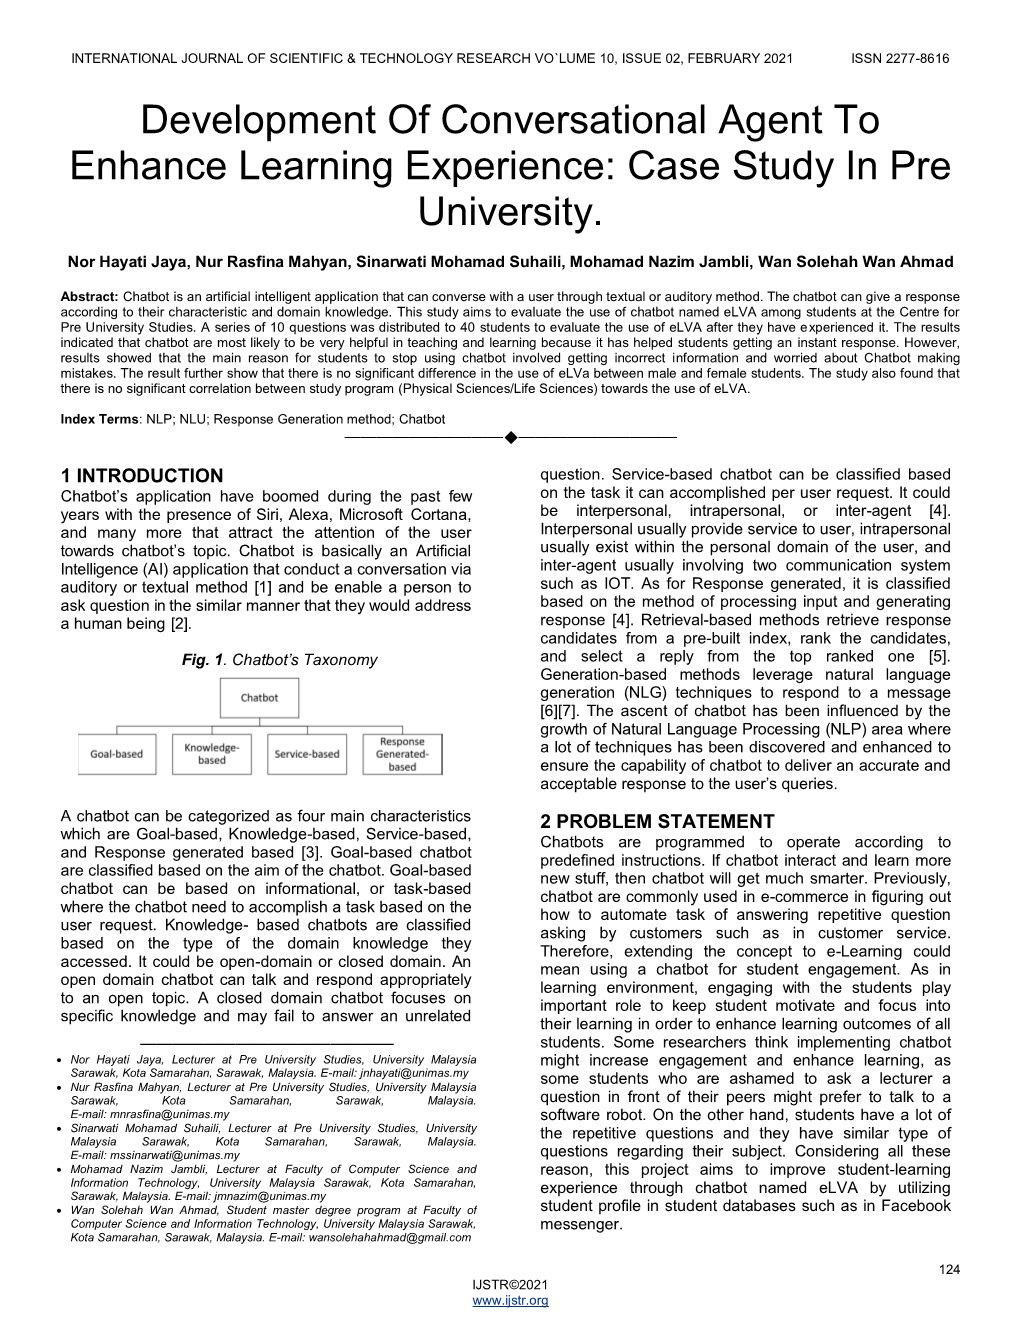 Development of Conversational Agent to Enhance Learning Experience: Case Study in Pre University